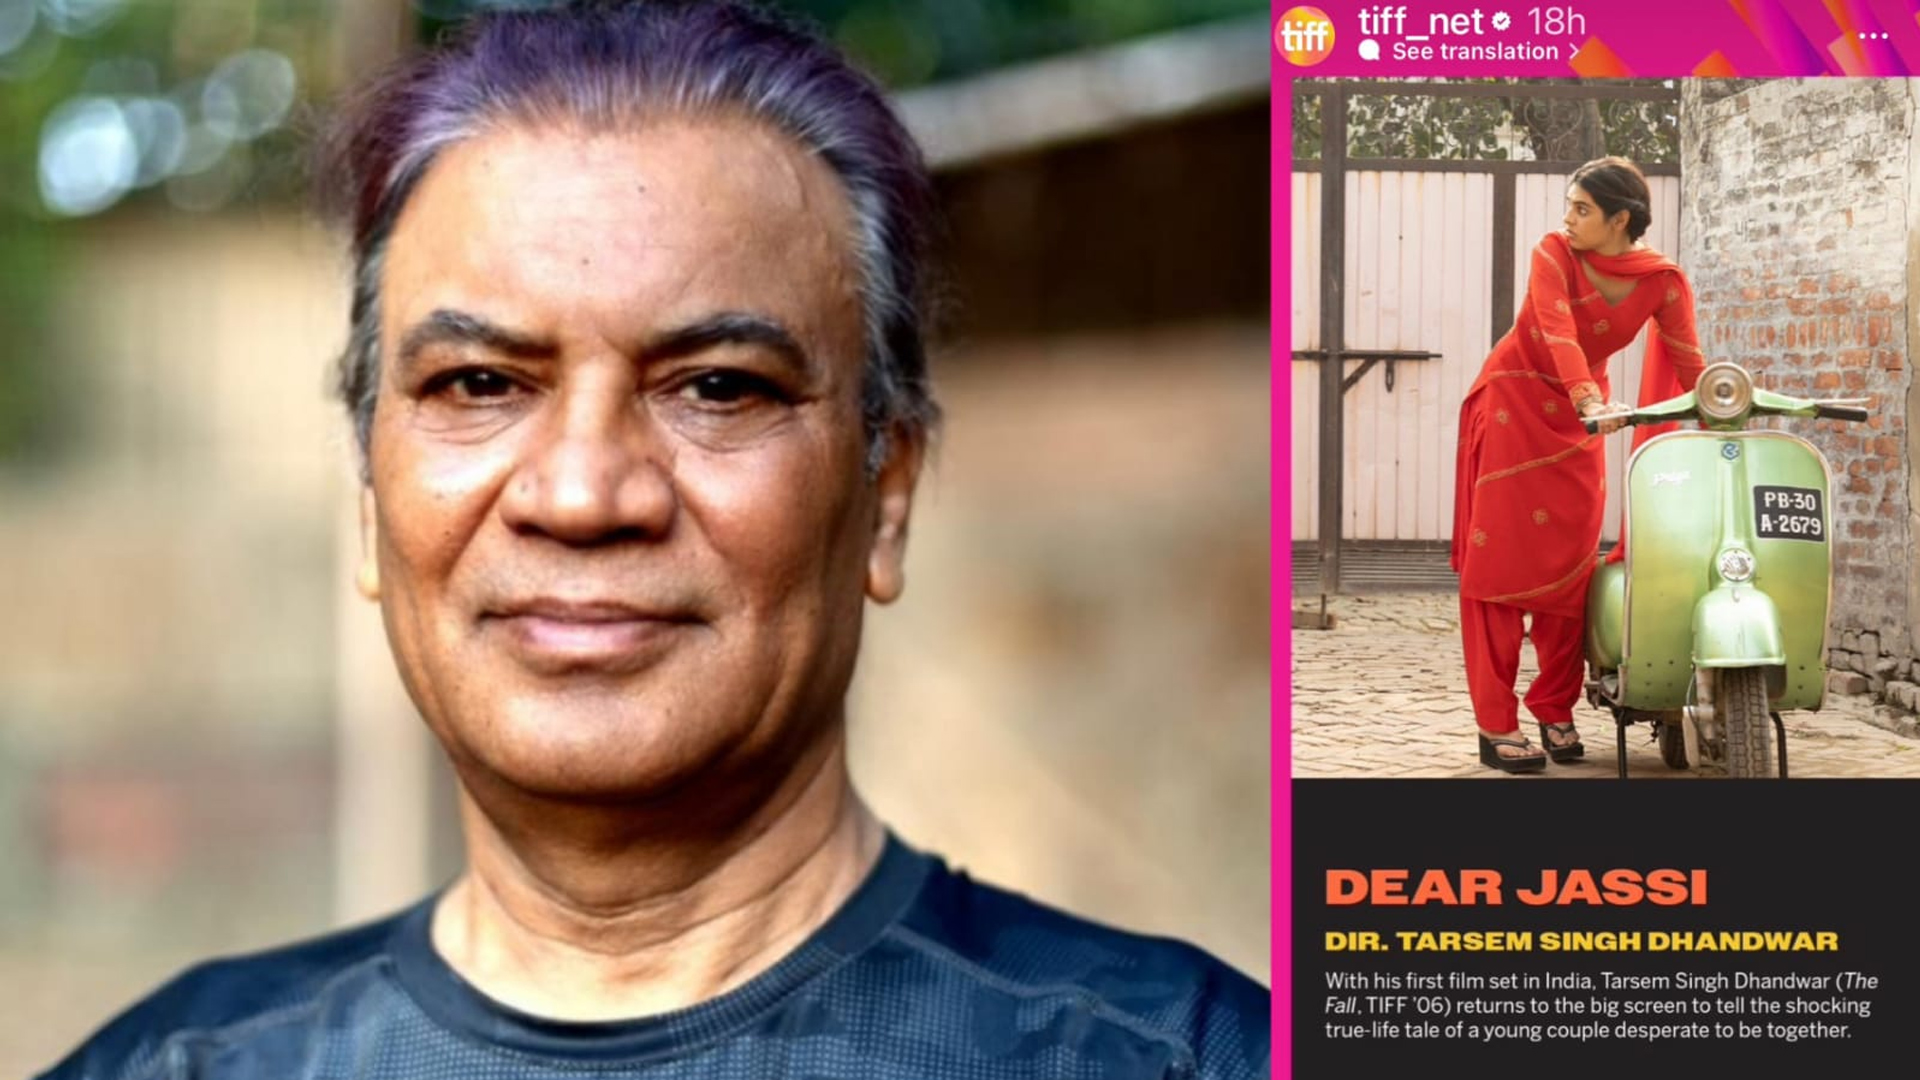 “I never realised working with Tarsem Singh on Dear Jassi would be a game changer as an actor! ”, says Vipin Sharma as his next film Dear Jassi to screen at The Toronto International Film Festival